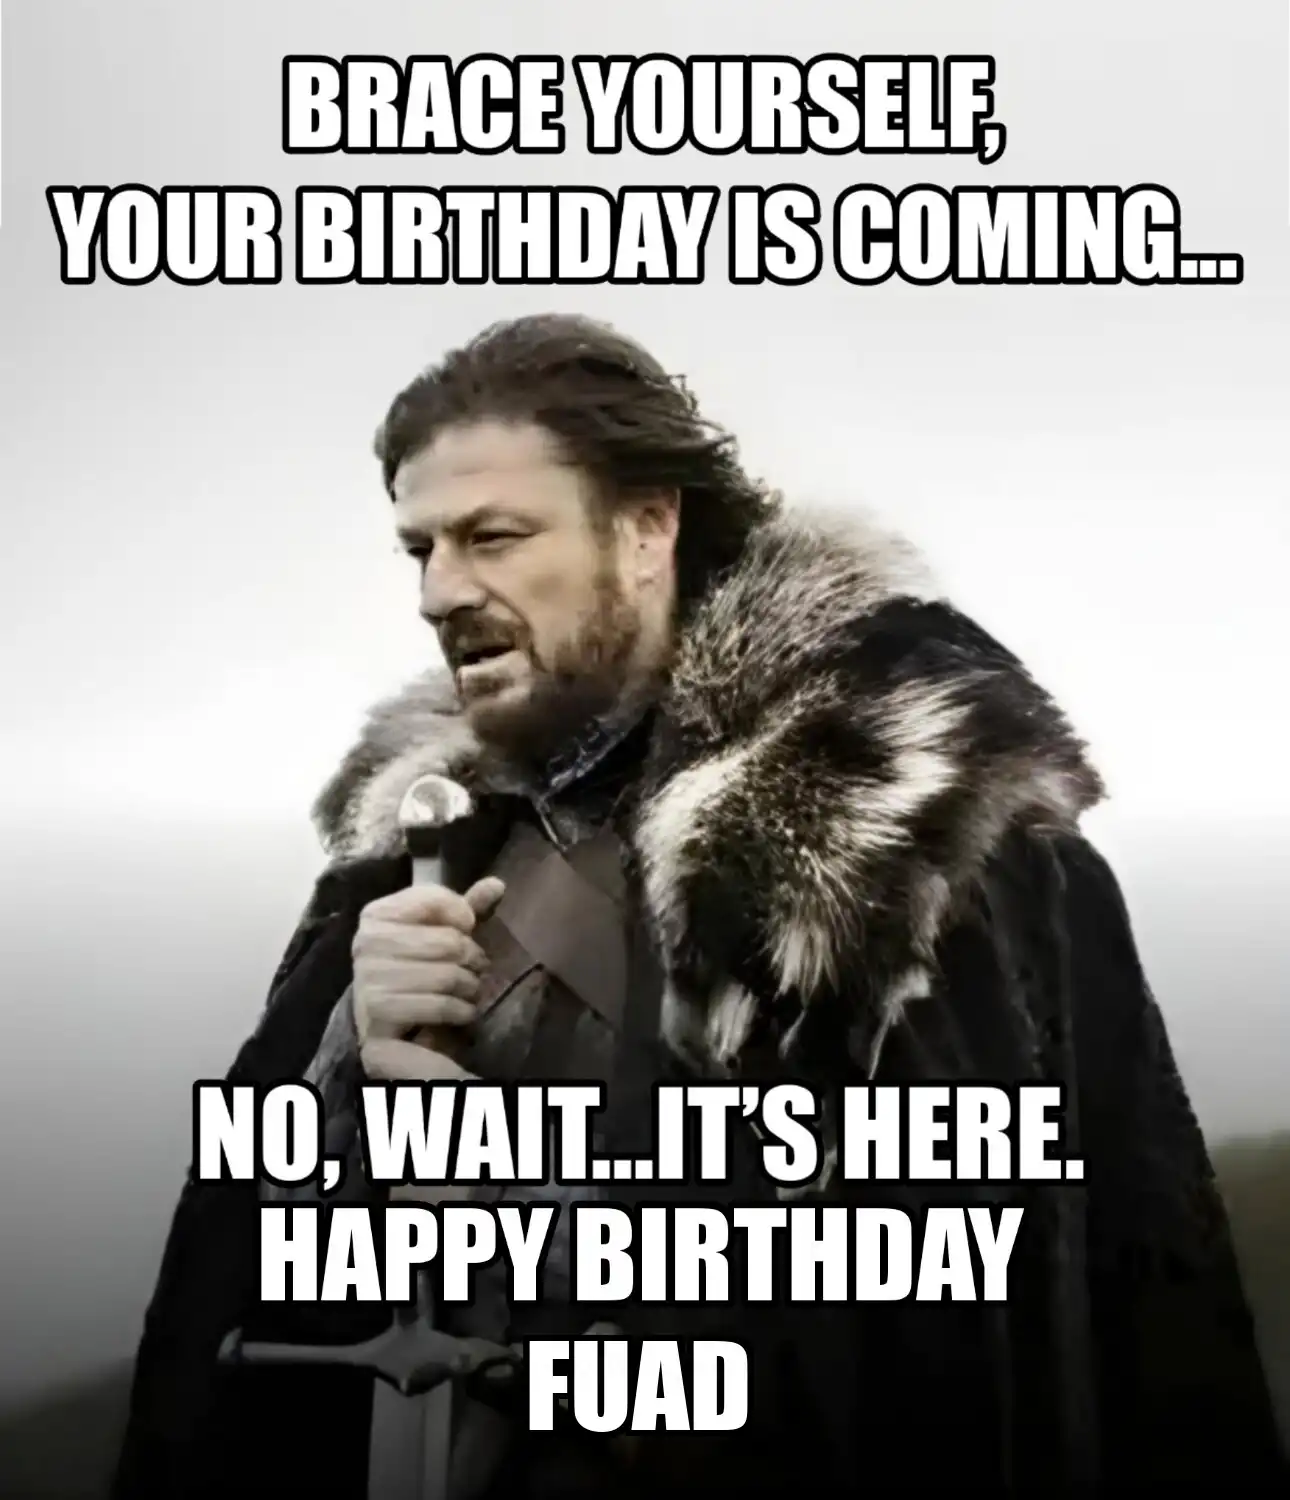 Happy Birthday Fuad Brace Yourself Your Birthday Is Coming Meme